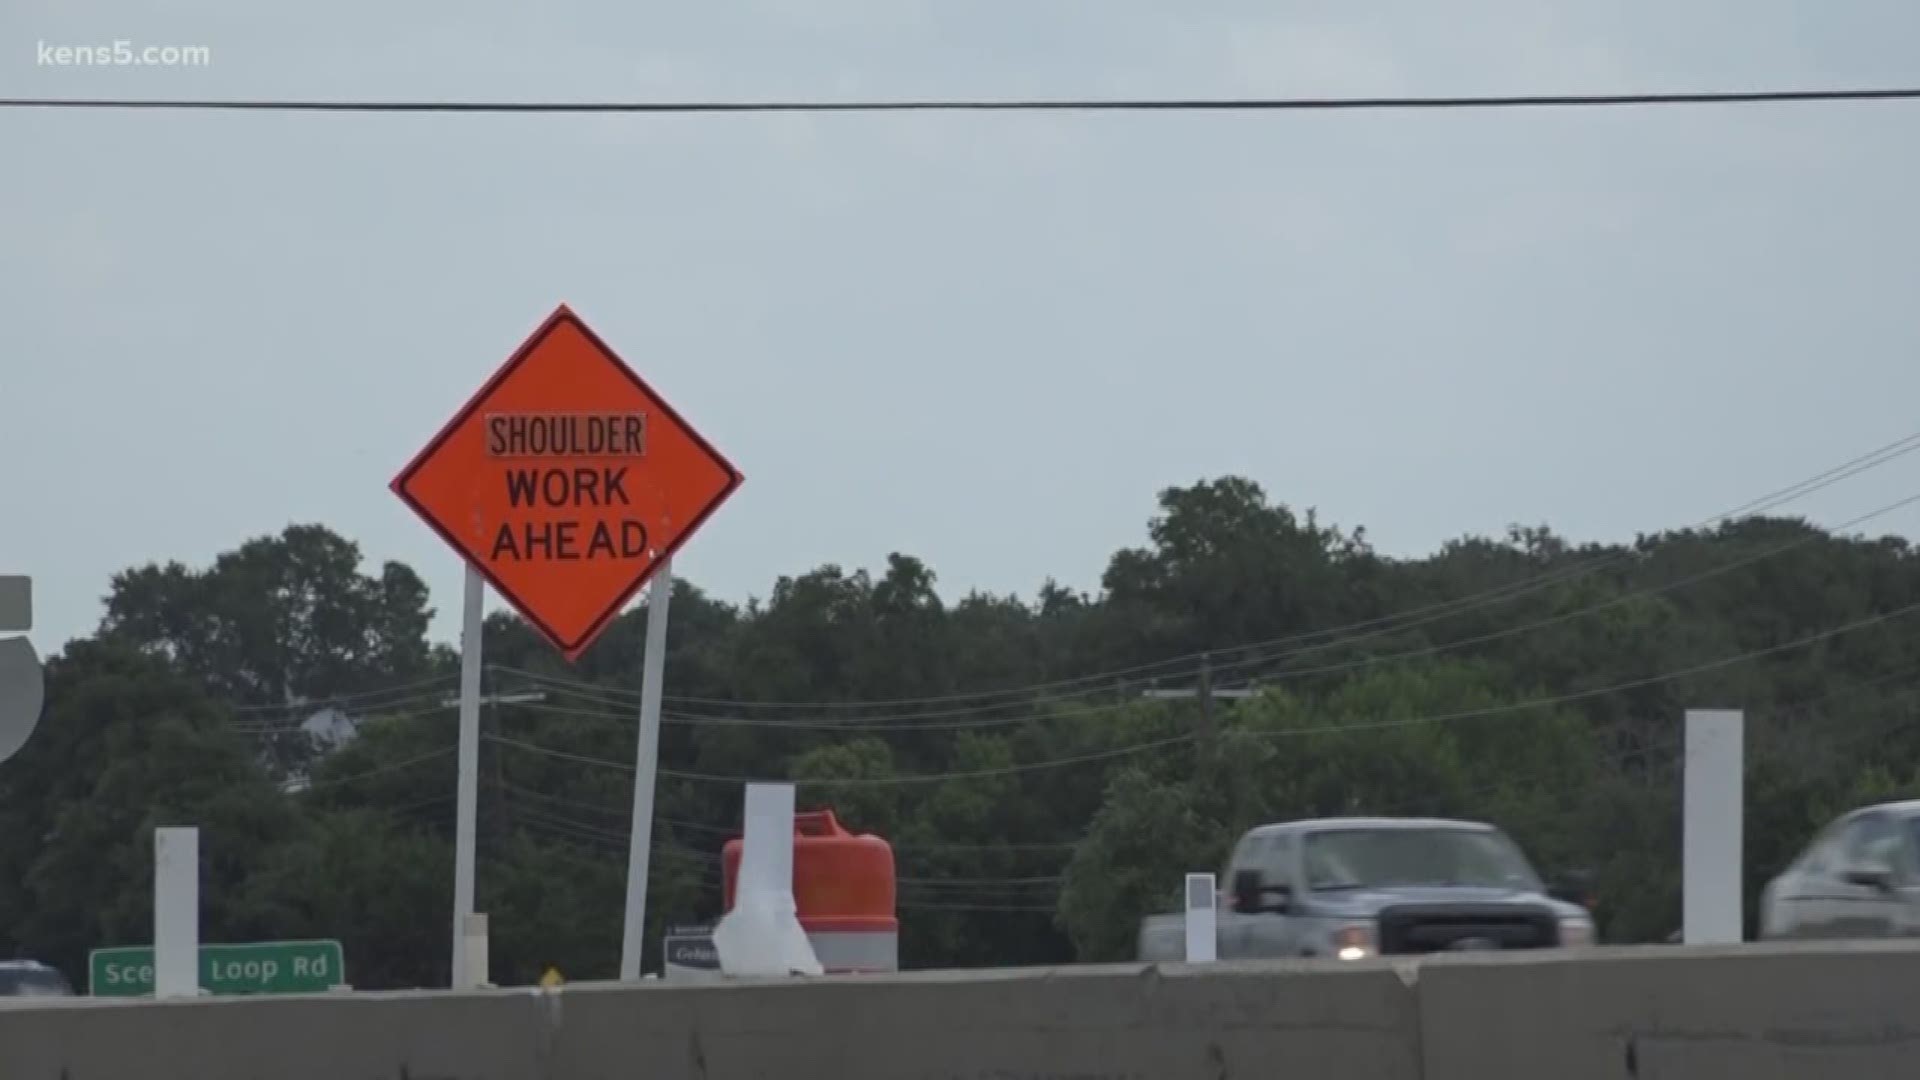 People say the road is unsafe from 1604 to the John's Road exit in Boerne. Construction that started two years ago is the root of the problems.